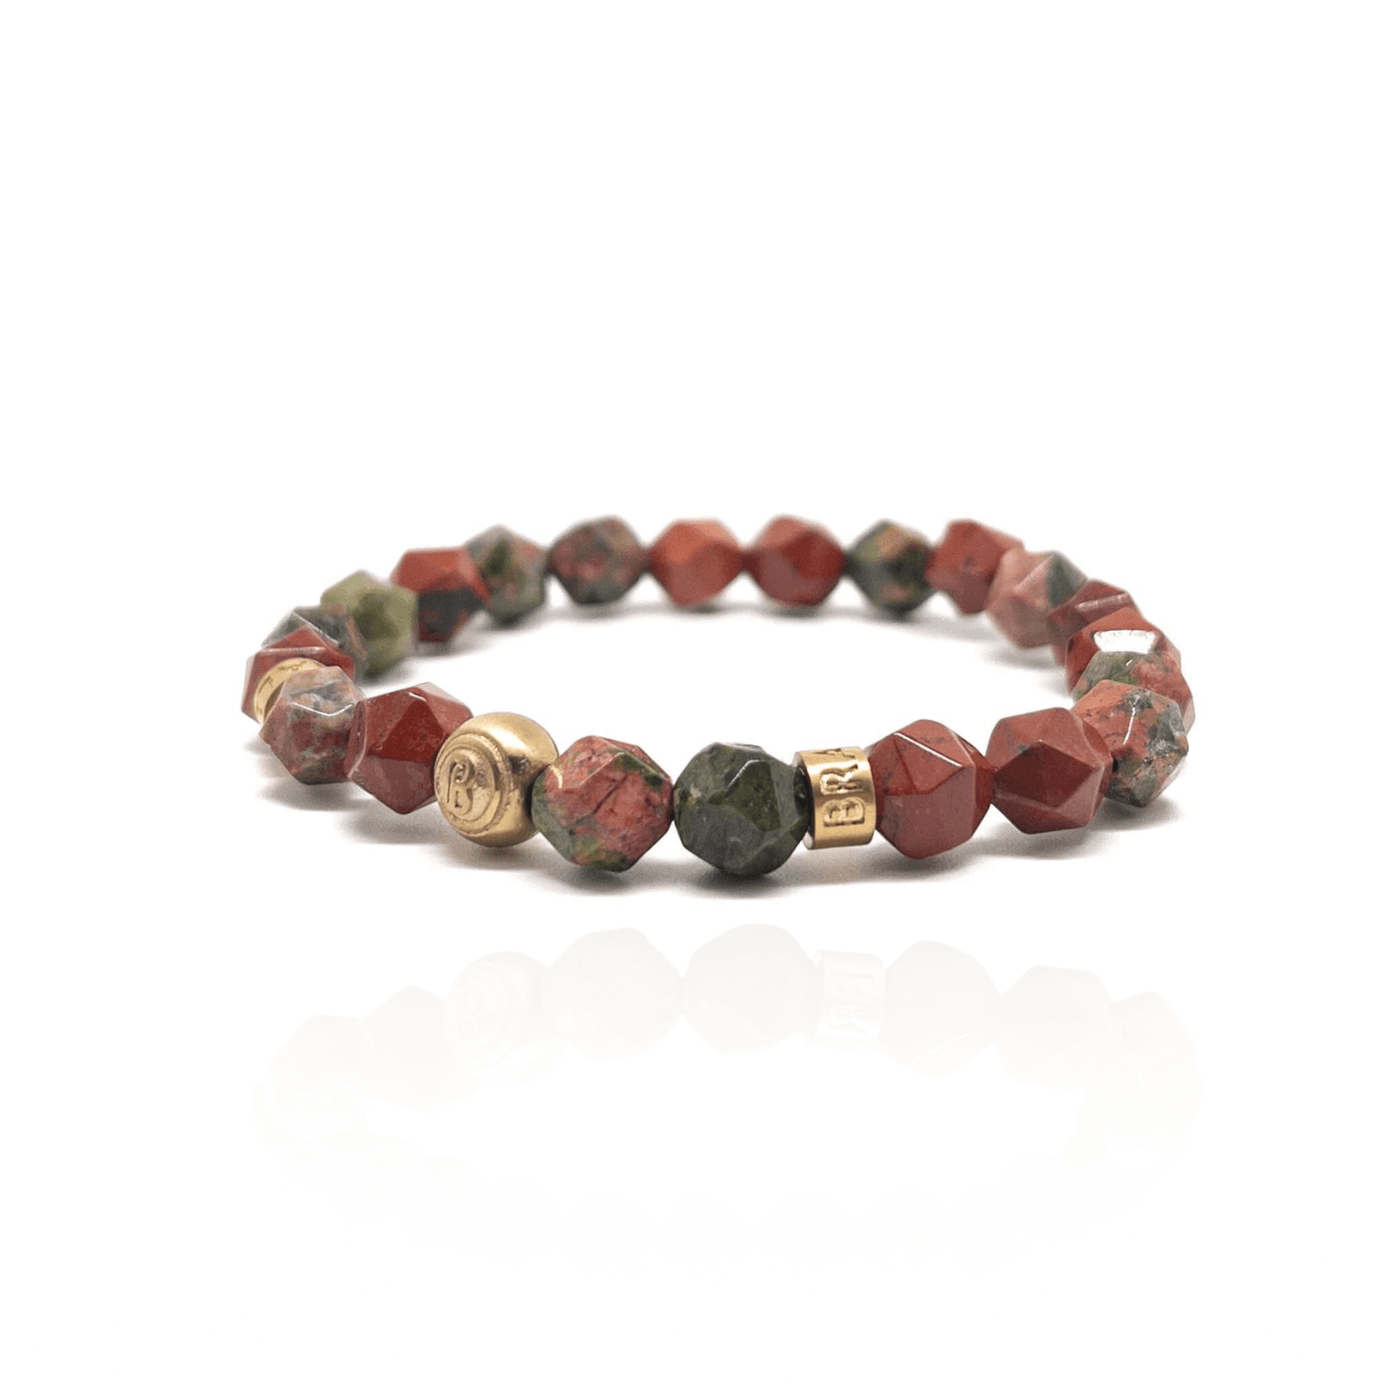 The Faceted Unakite and Red Jasper Signed Bracelet